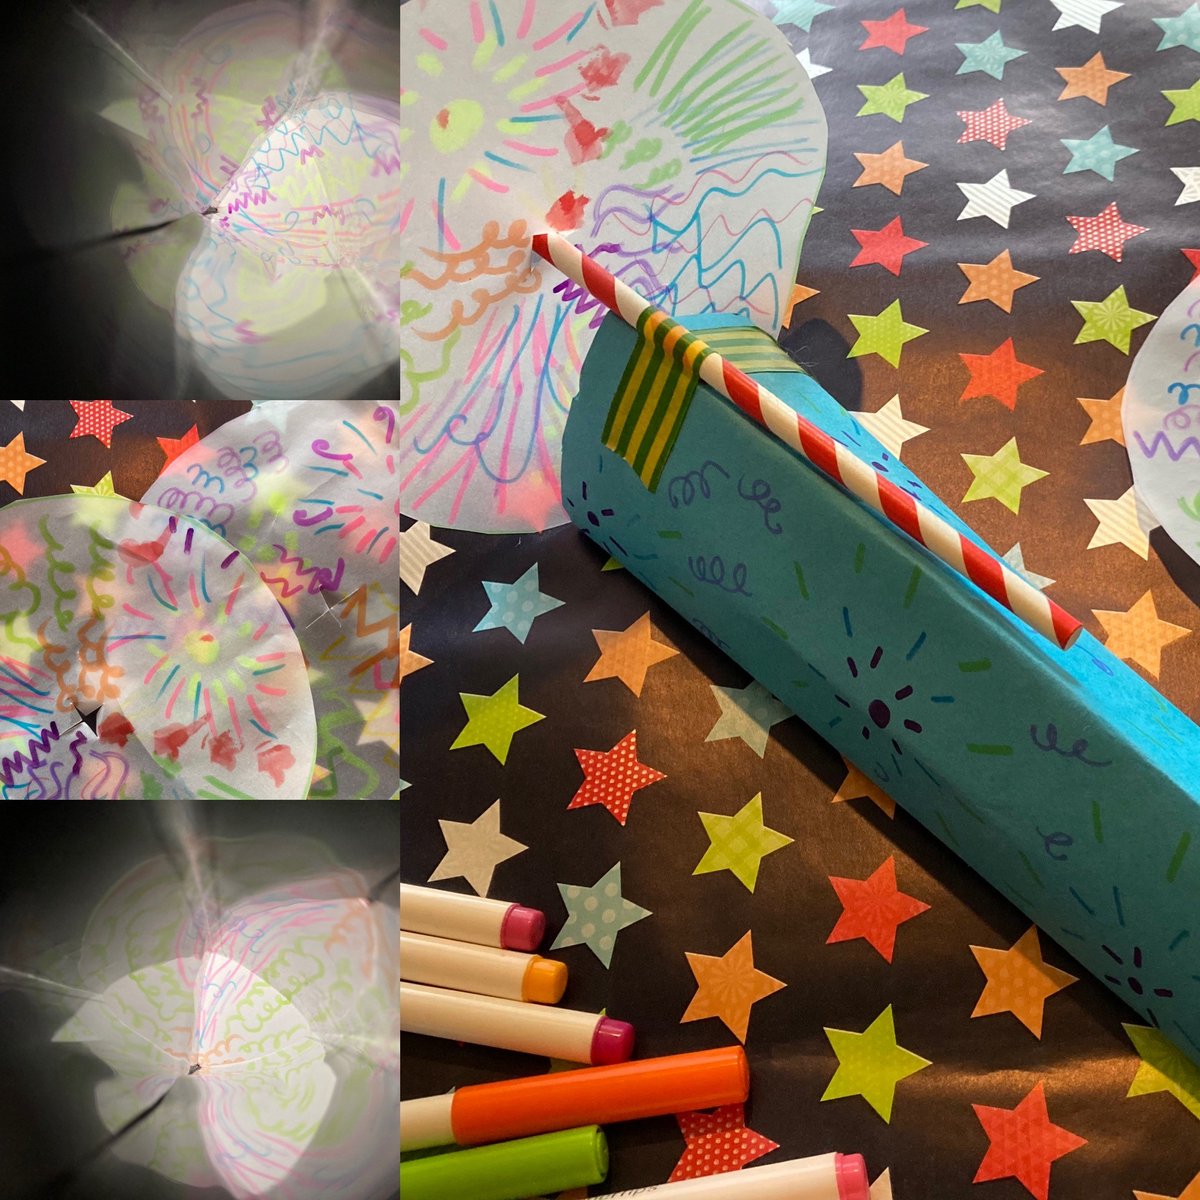 Today 10am-1pm! Firework Kaleidoscope, a free family fun drop in at Swansea Museum - swanseamuseum.co.uk/whats-on/events #CostOfLiving #HereForSwansea @swanseamuseum